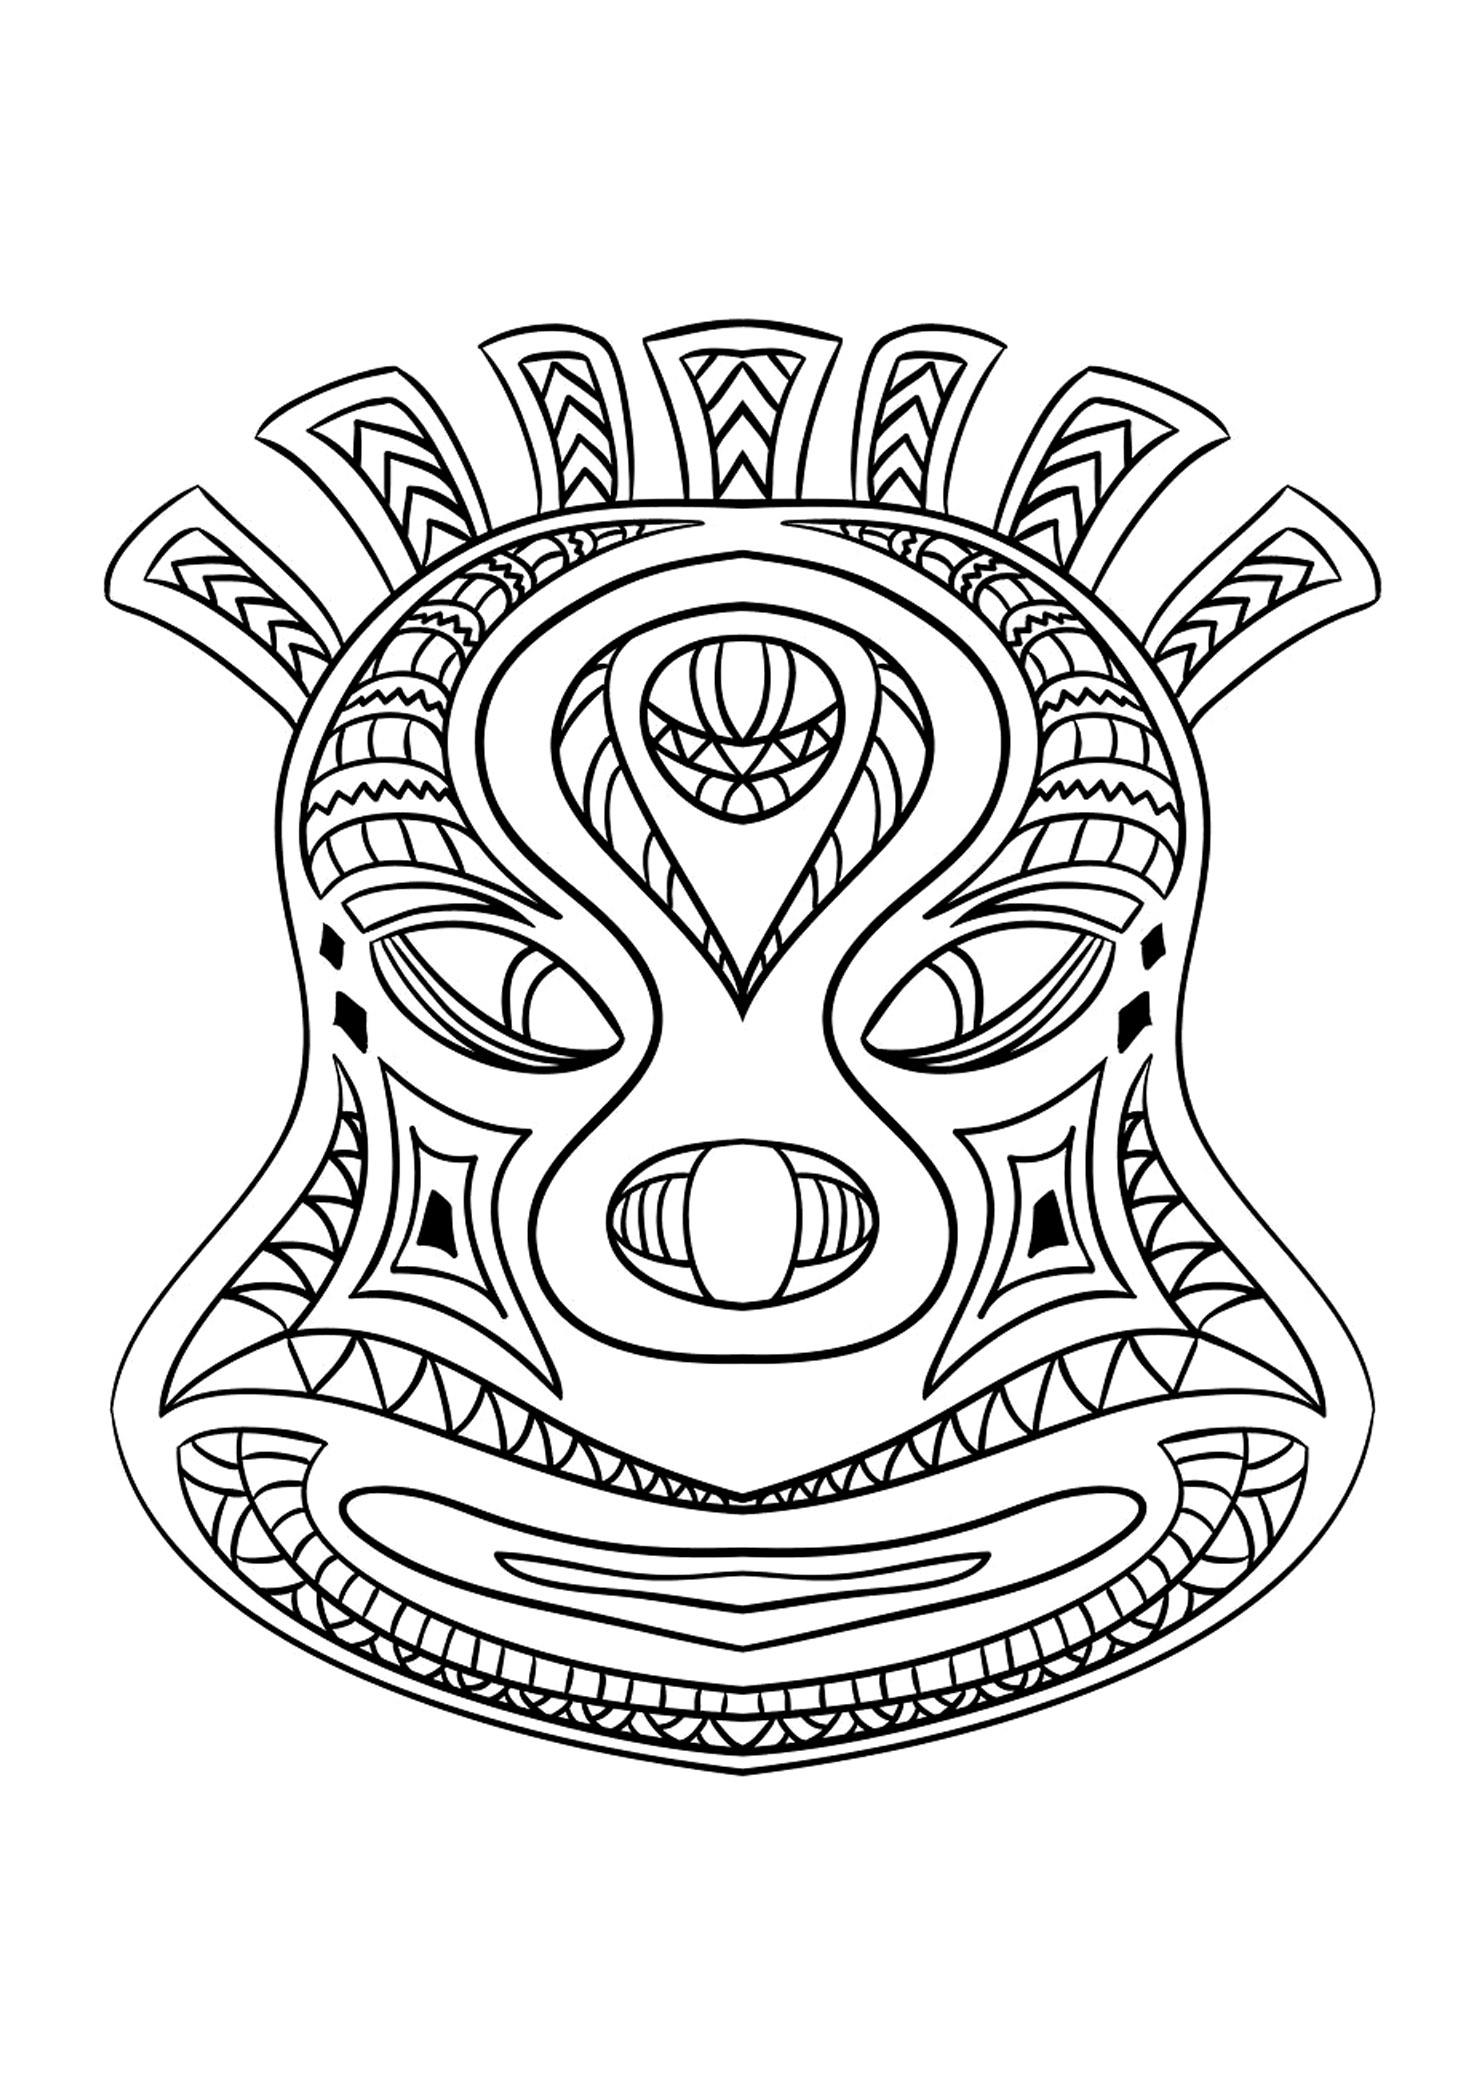 African mask 2 - Africa Adult Coloring Pages